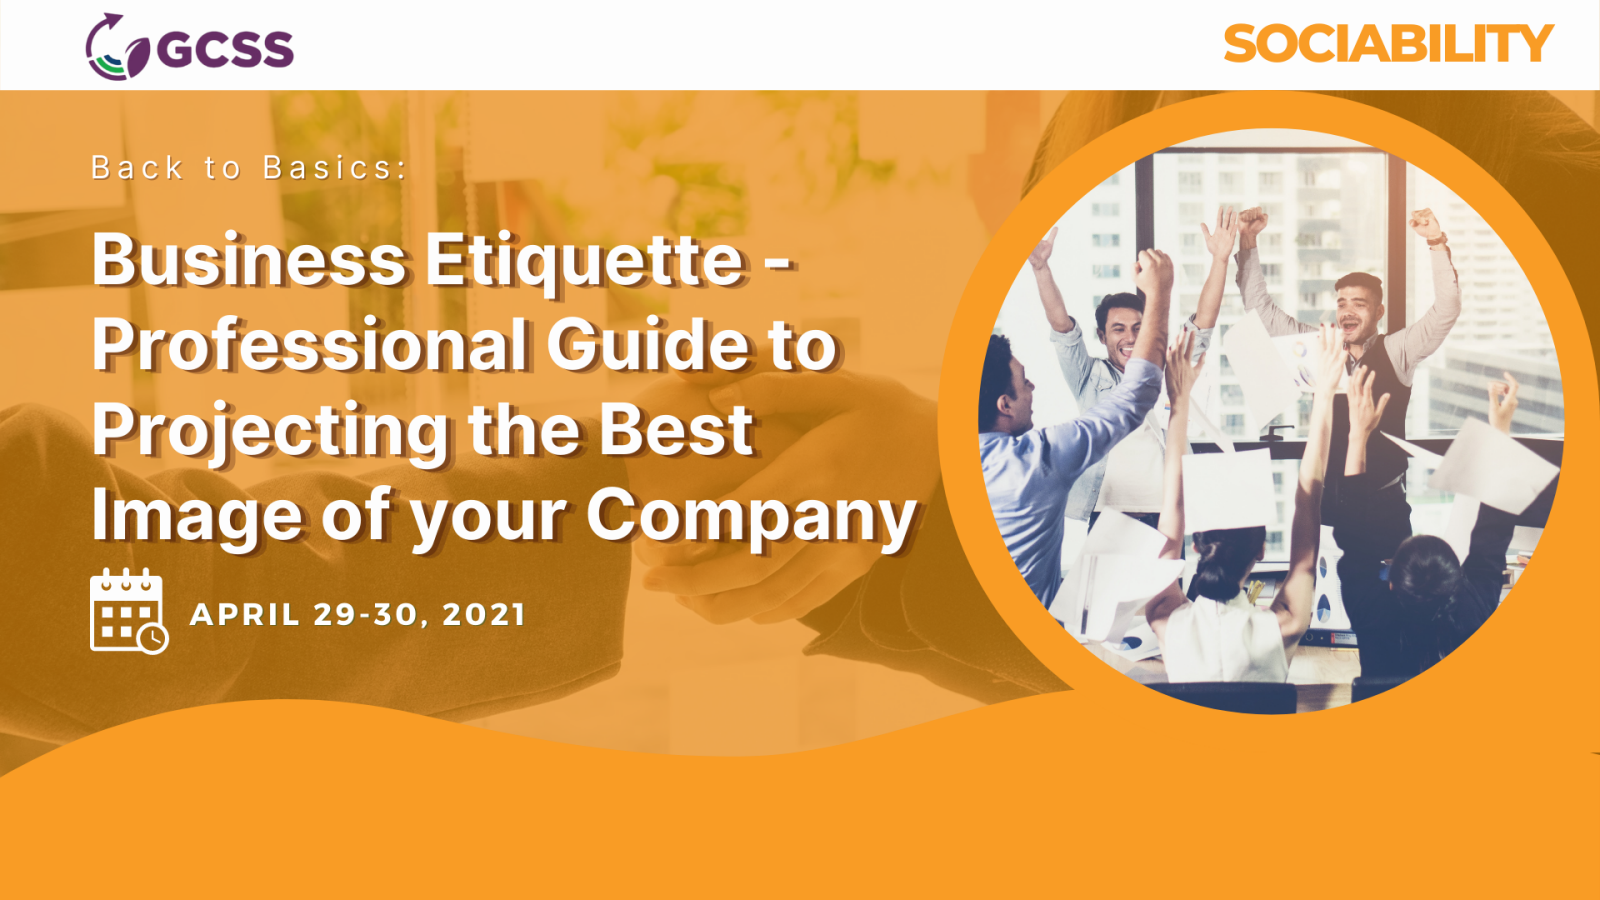 Business Etiquette - Professional Guide to Projecting the Best Image of your Company, Manila, National Capital Region, Philippines